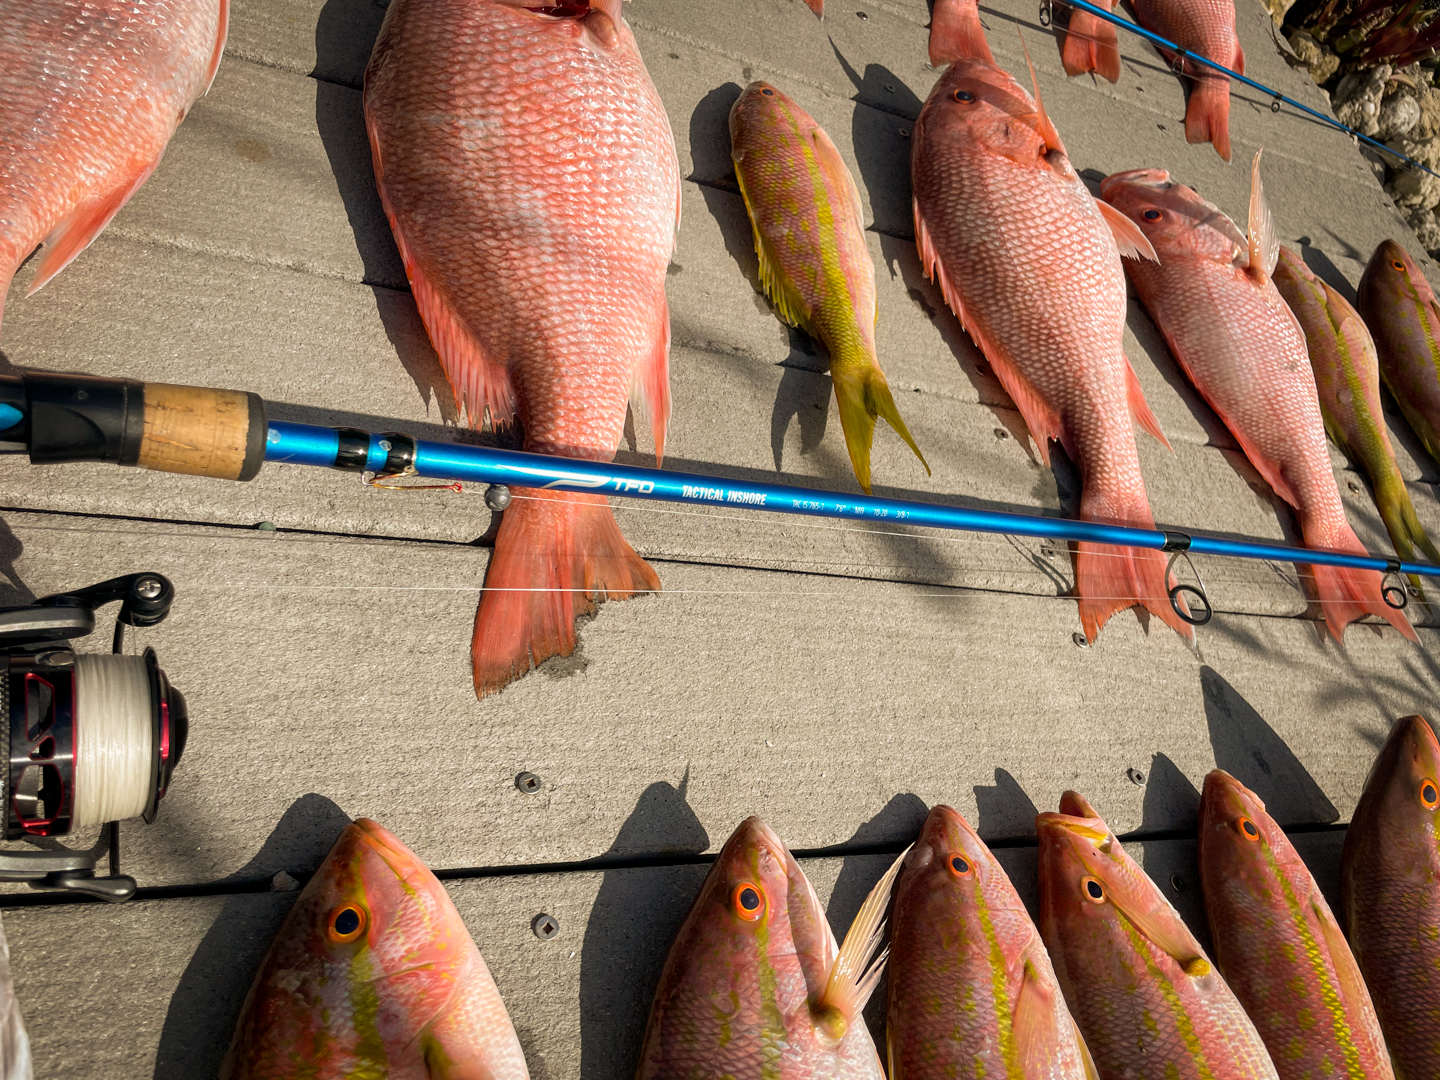 Light Tackle Snapper Fishing - Temple Fork Outfitters